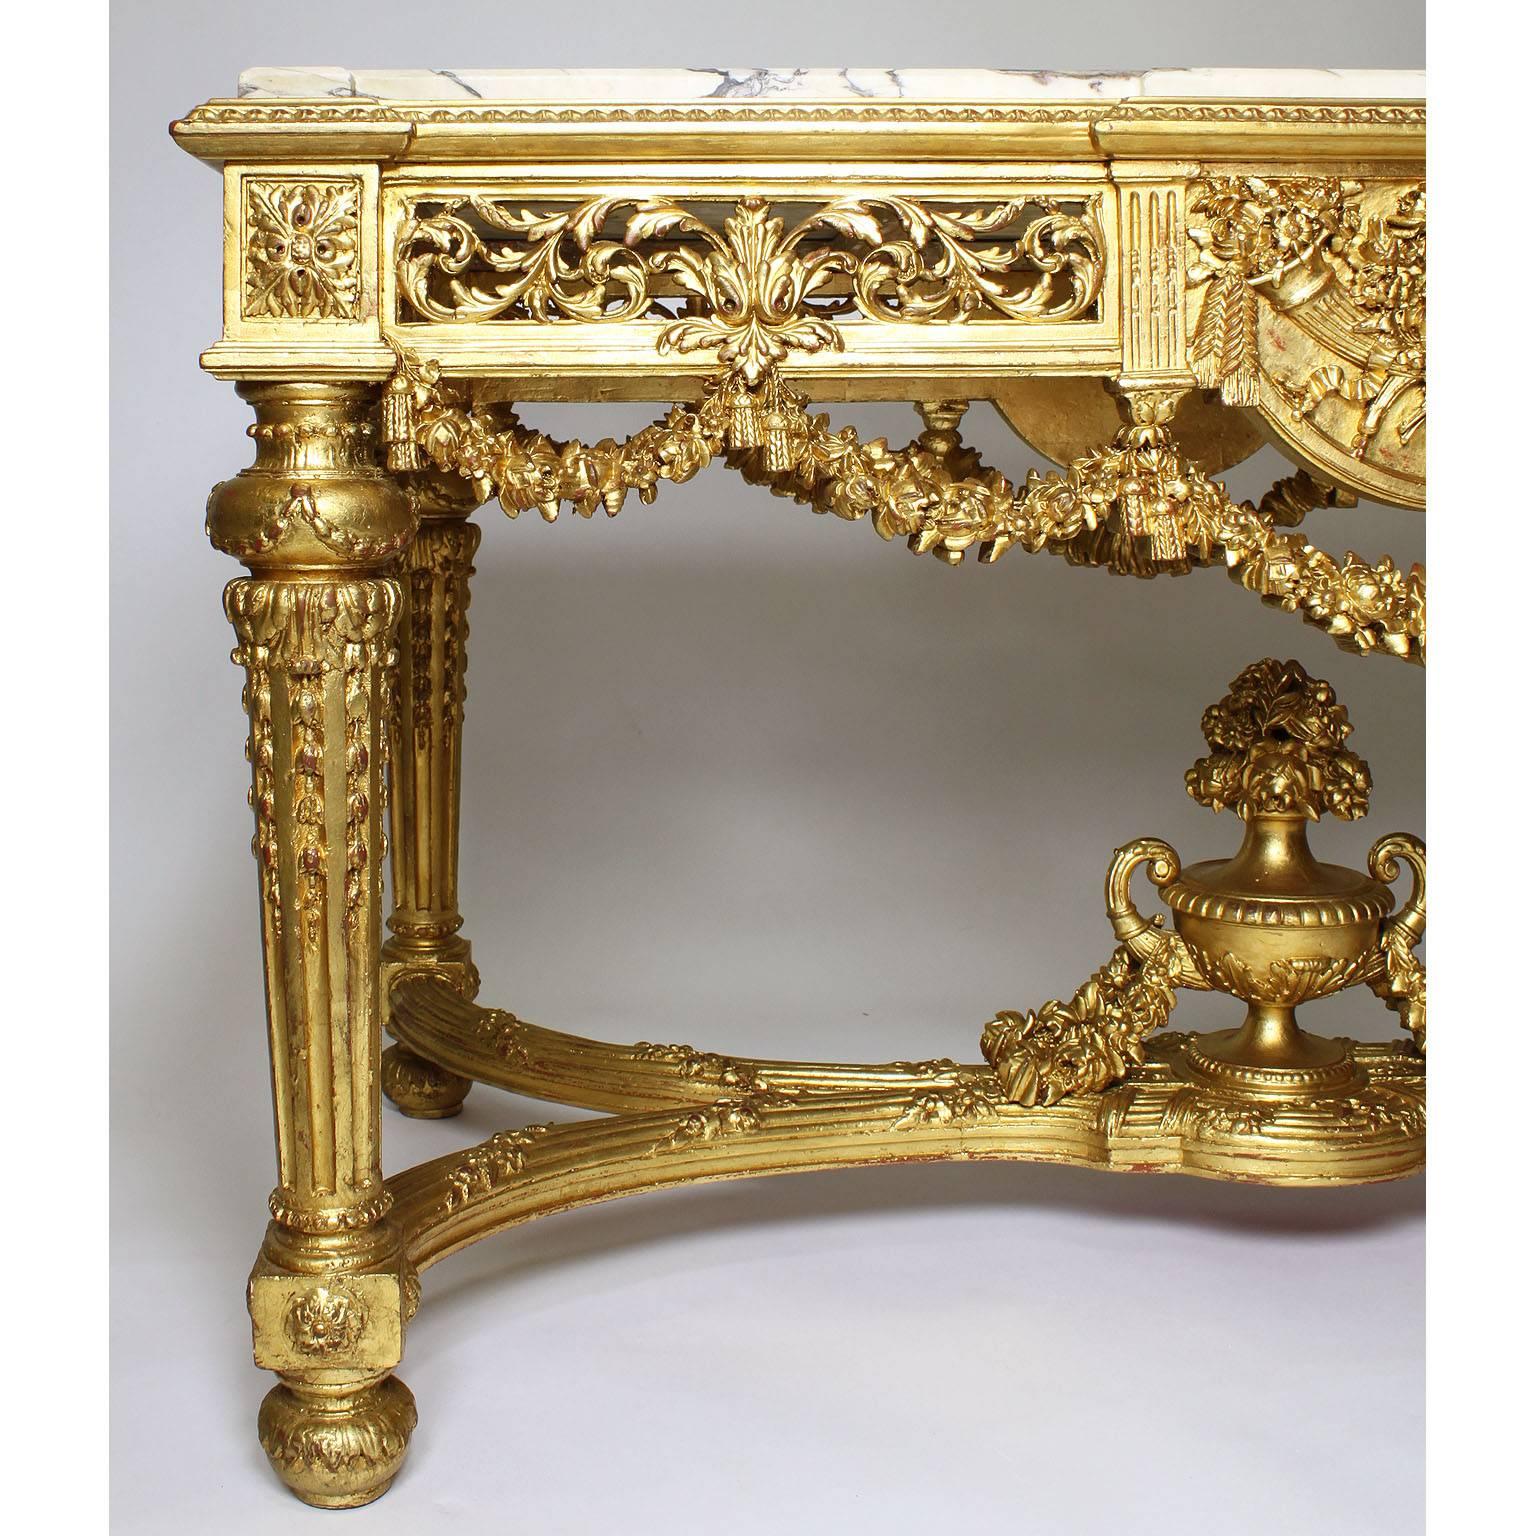 Early 20th Century Fine French 19th-20th Century Louis XVI Style Giltwood Carved Centre Hall Table For Sale